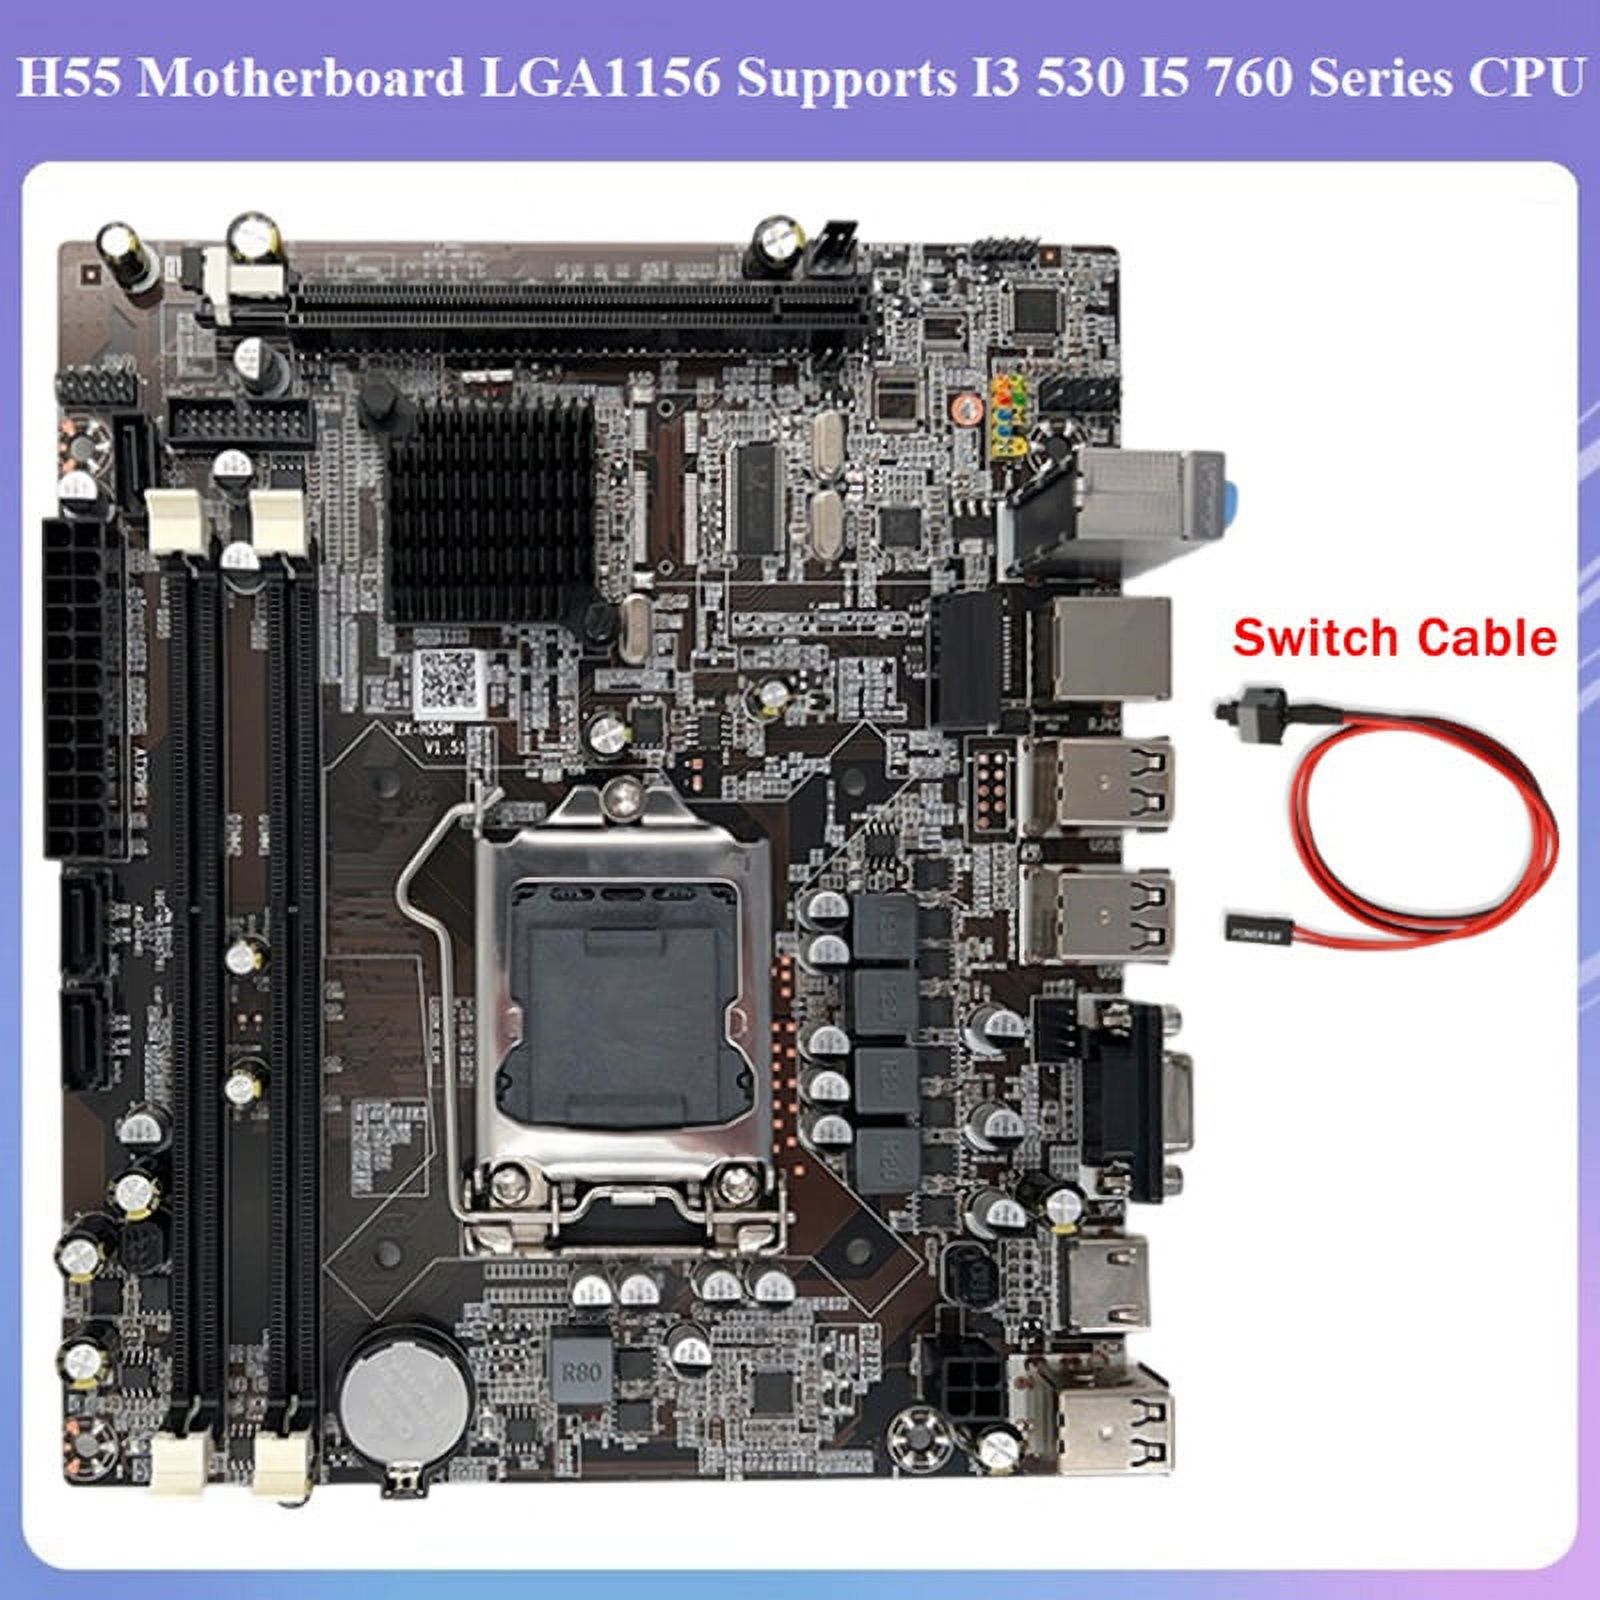 H55 Motherboard LGA1156 Supports I3 530 I5 760 Series CPU DDR3 Memory Desktop Computer Motherboard with Switch Cable - image 1 of 8